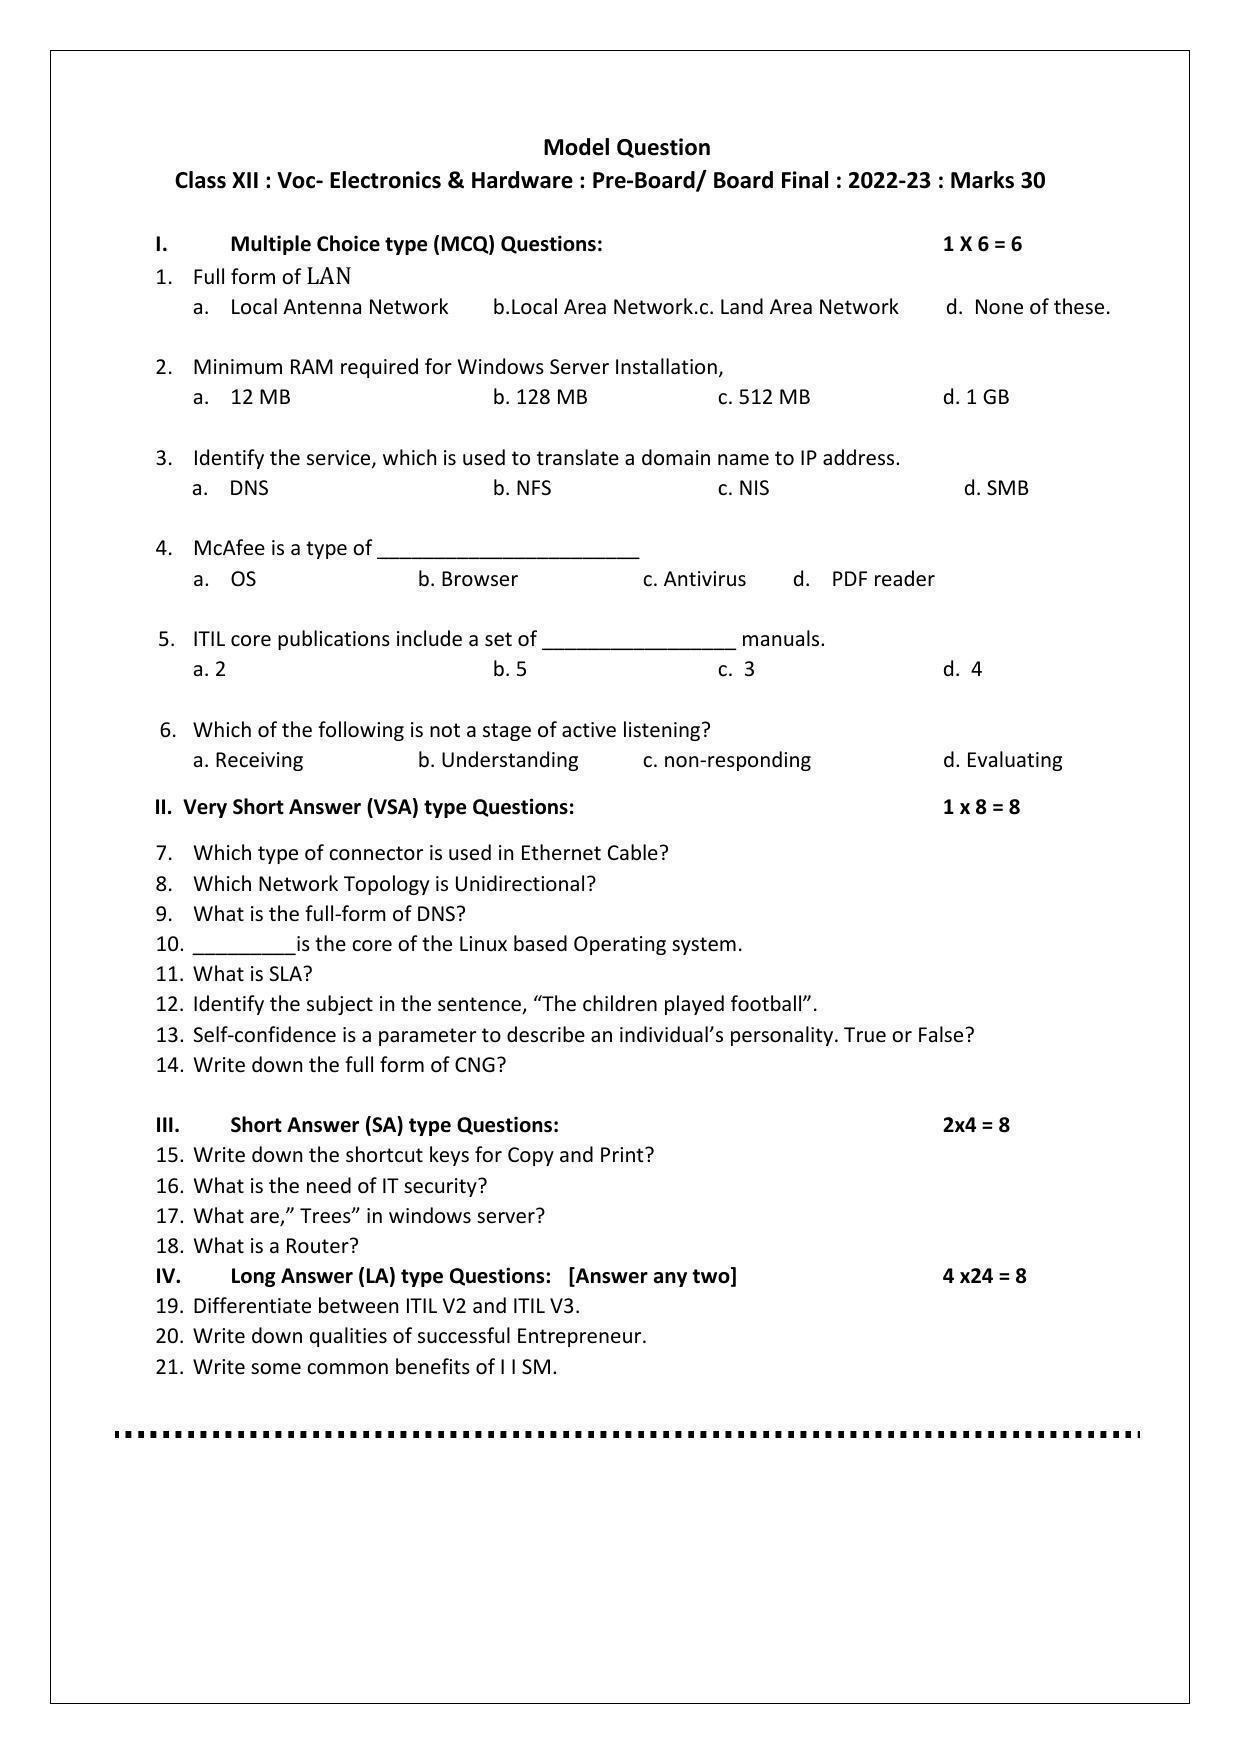 Tripura Board Class 12th Vocational (Theo & Prac) Model Question Paper 2023 - Page 5